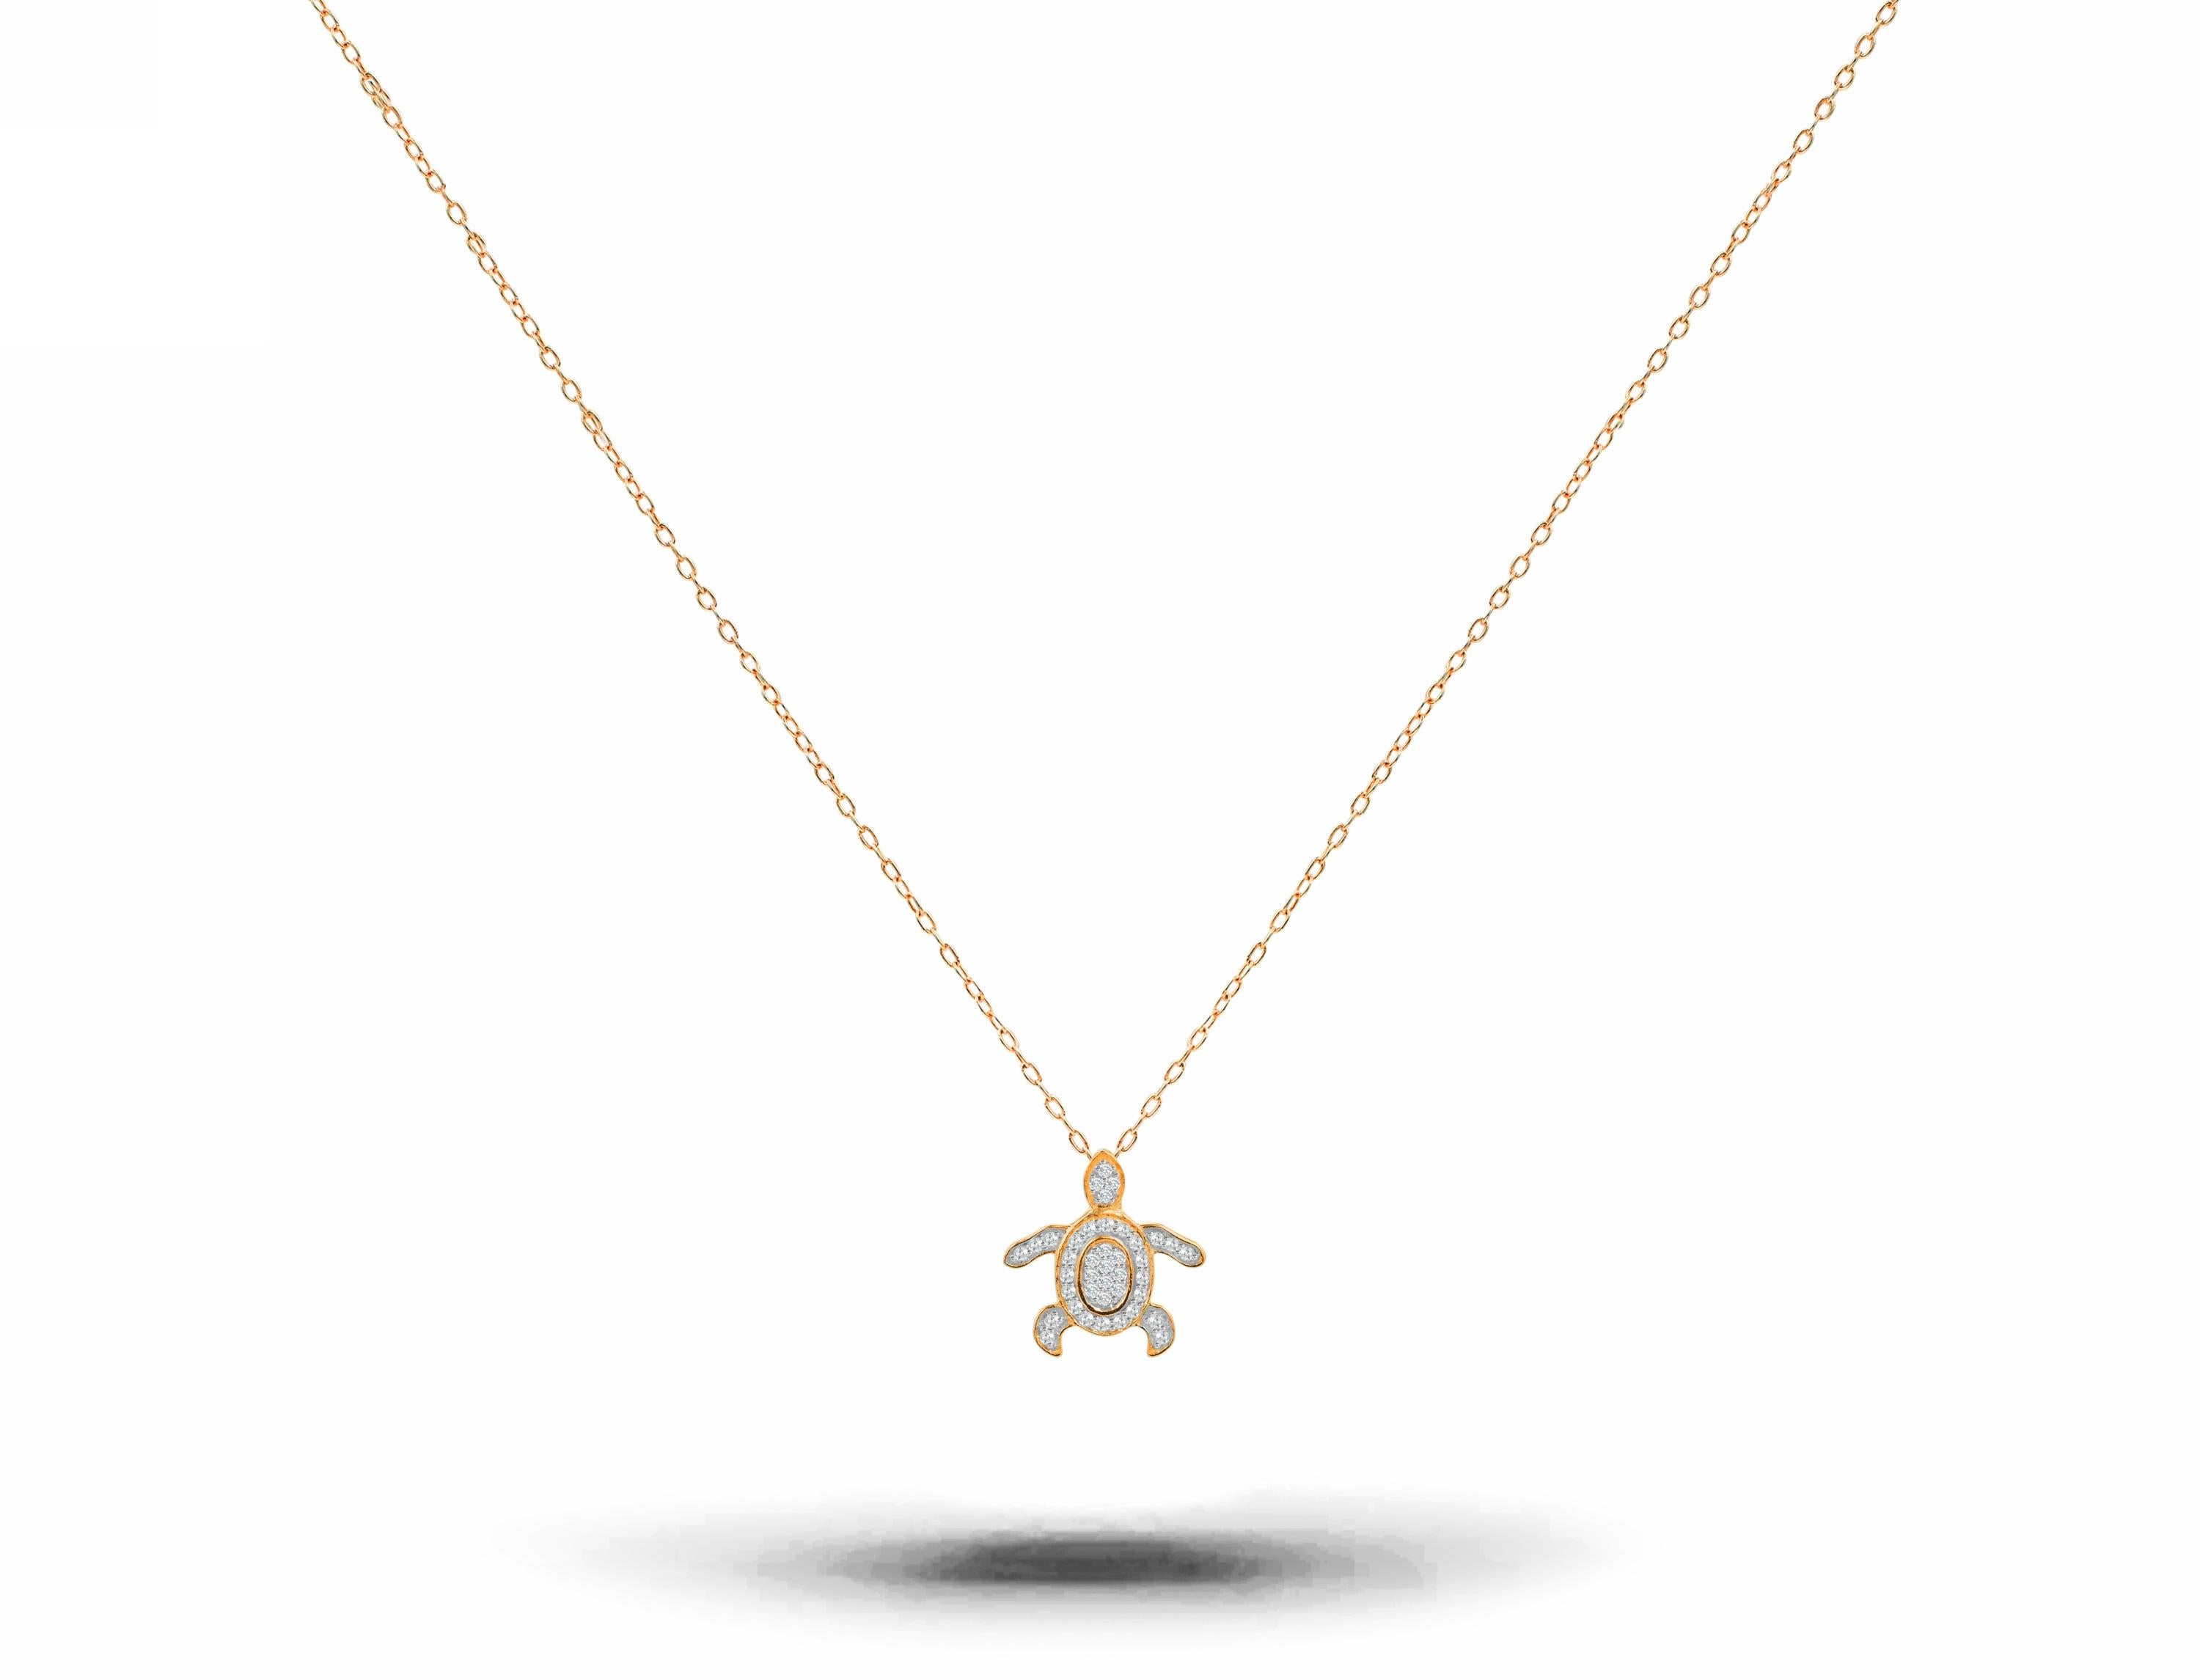 Delicate Dainty Turtle Charm Necklace with natural diamond is made of 14k solid gold.
Available in three colors of gold: White Gold / Rose Gold / Yellow Gold.

Lightweight and gorgeous natural genuine round cut diamond. Each diamond is hand selected